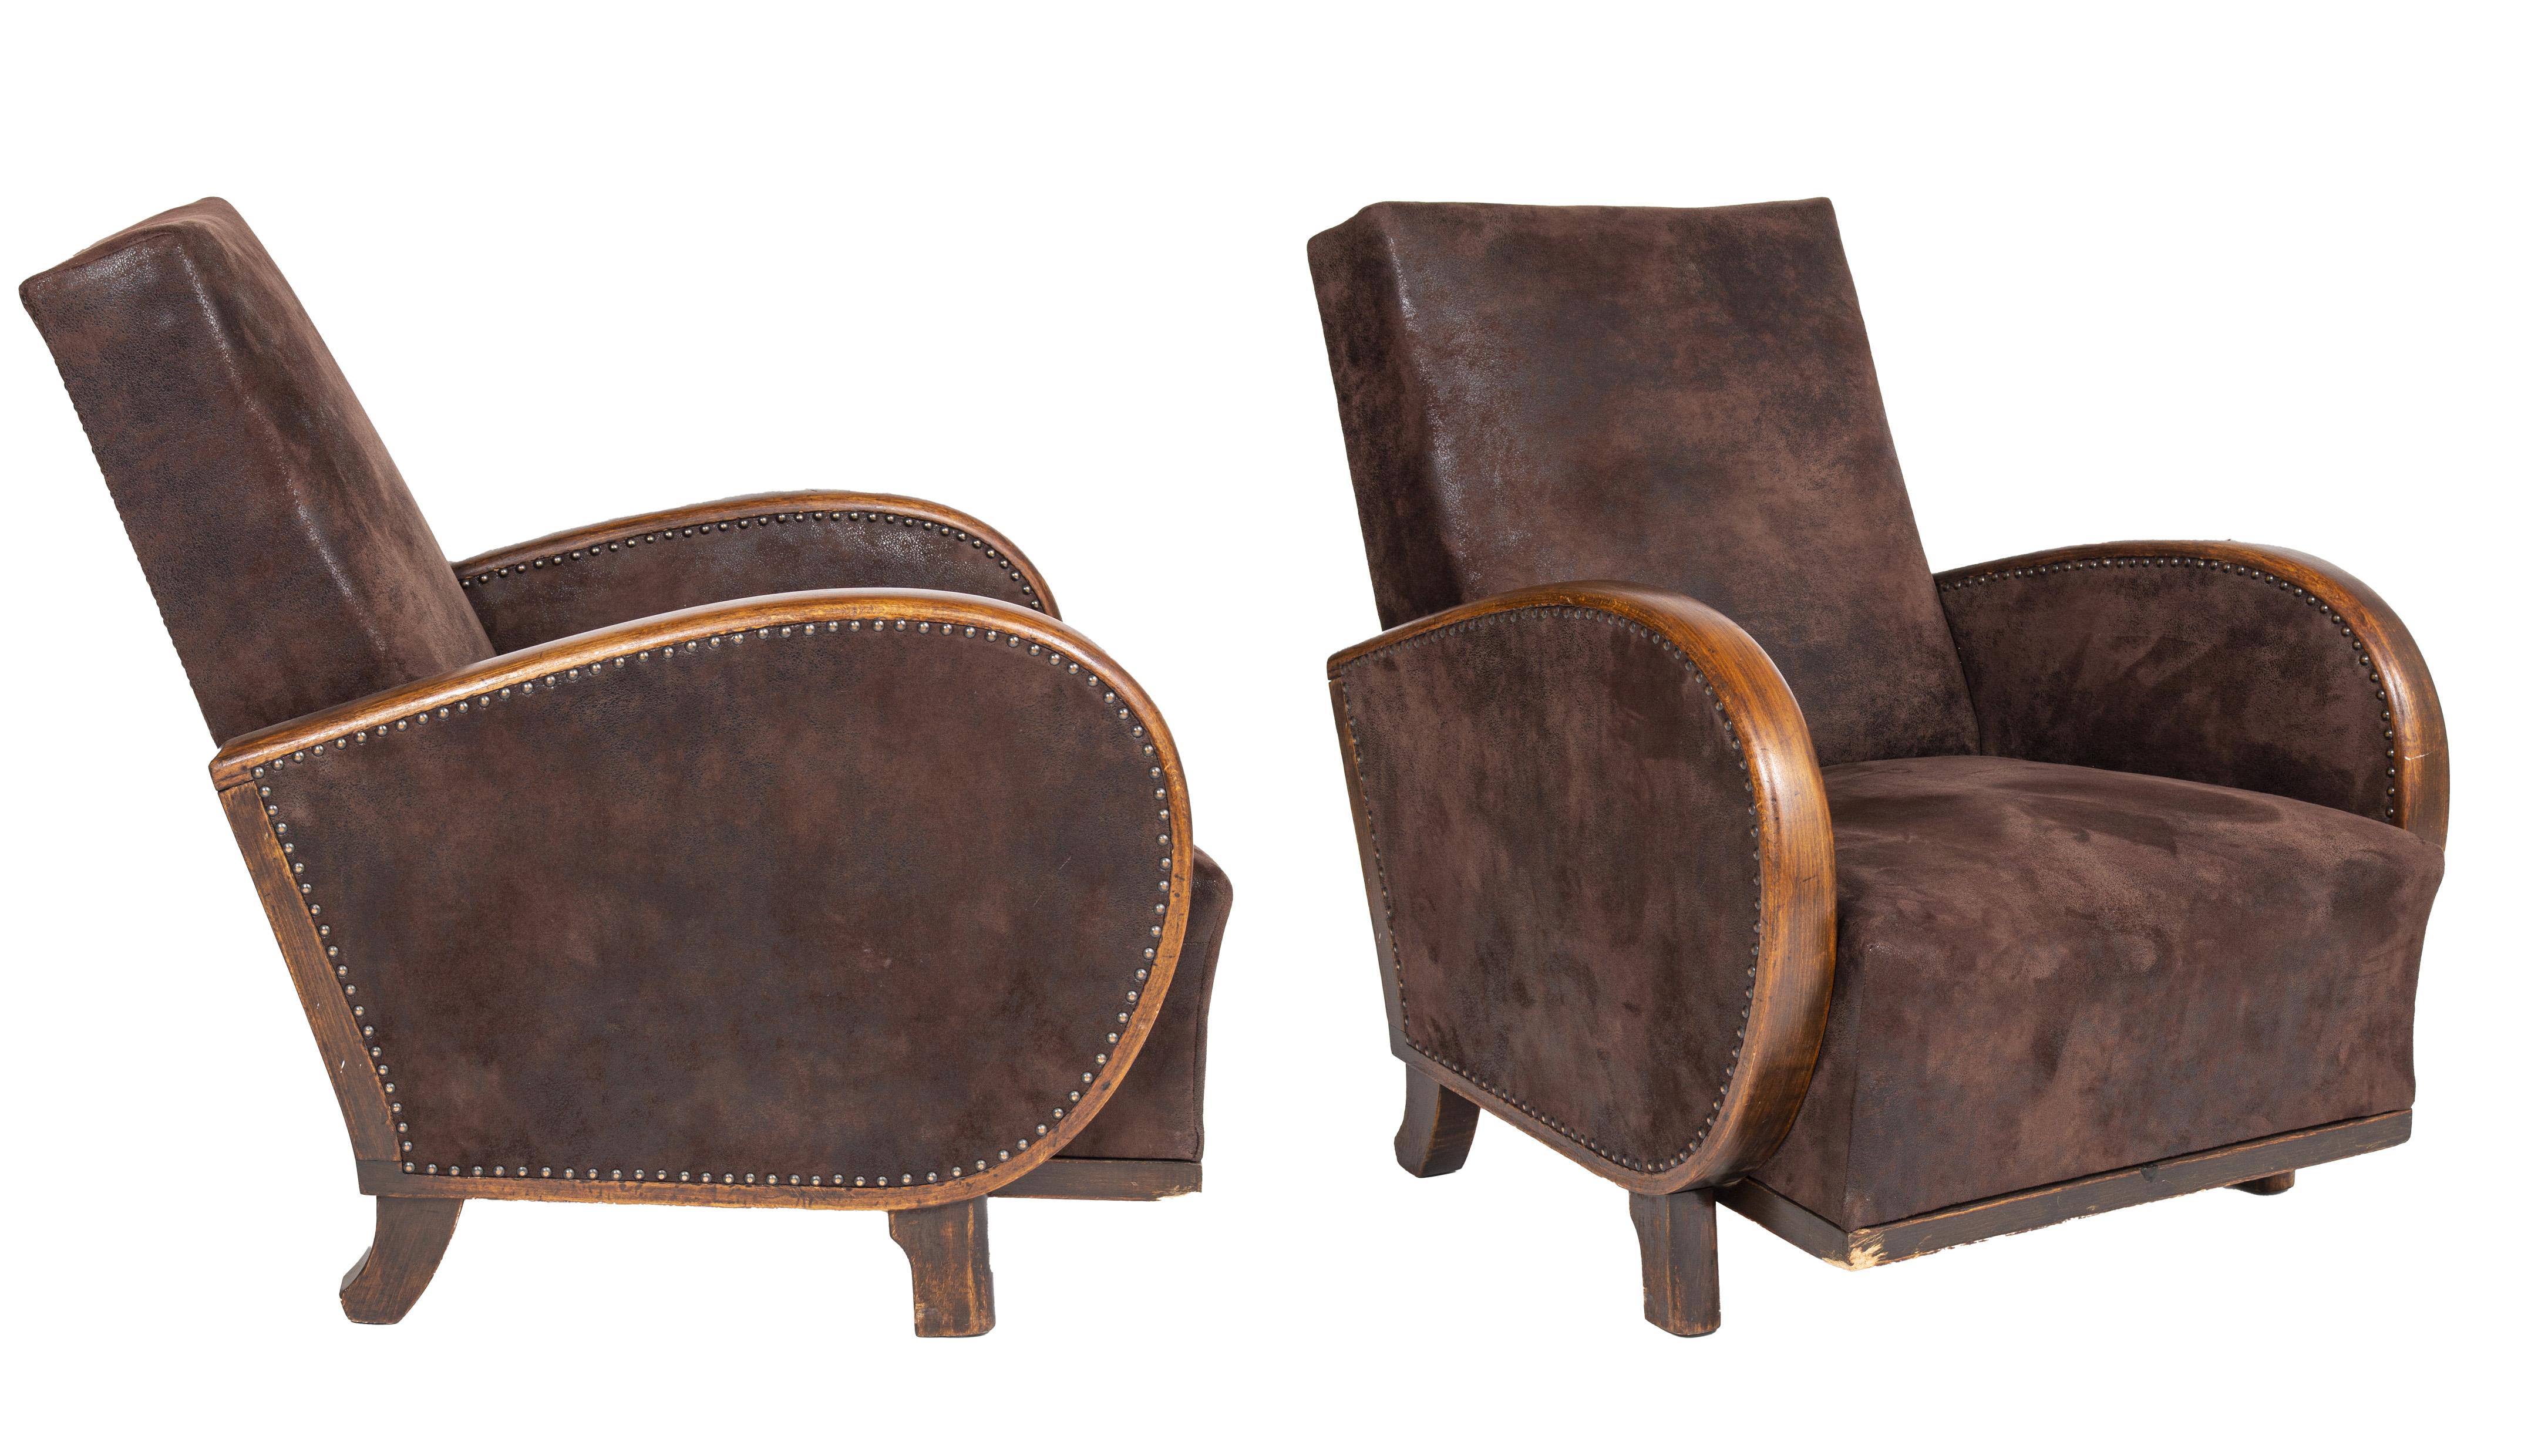 Art Deco armchairs from the 1930s, with brown faux leather upholstery.